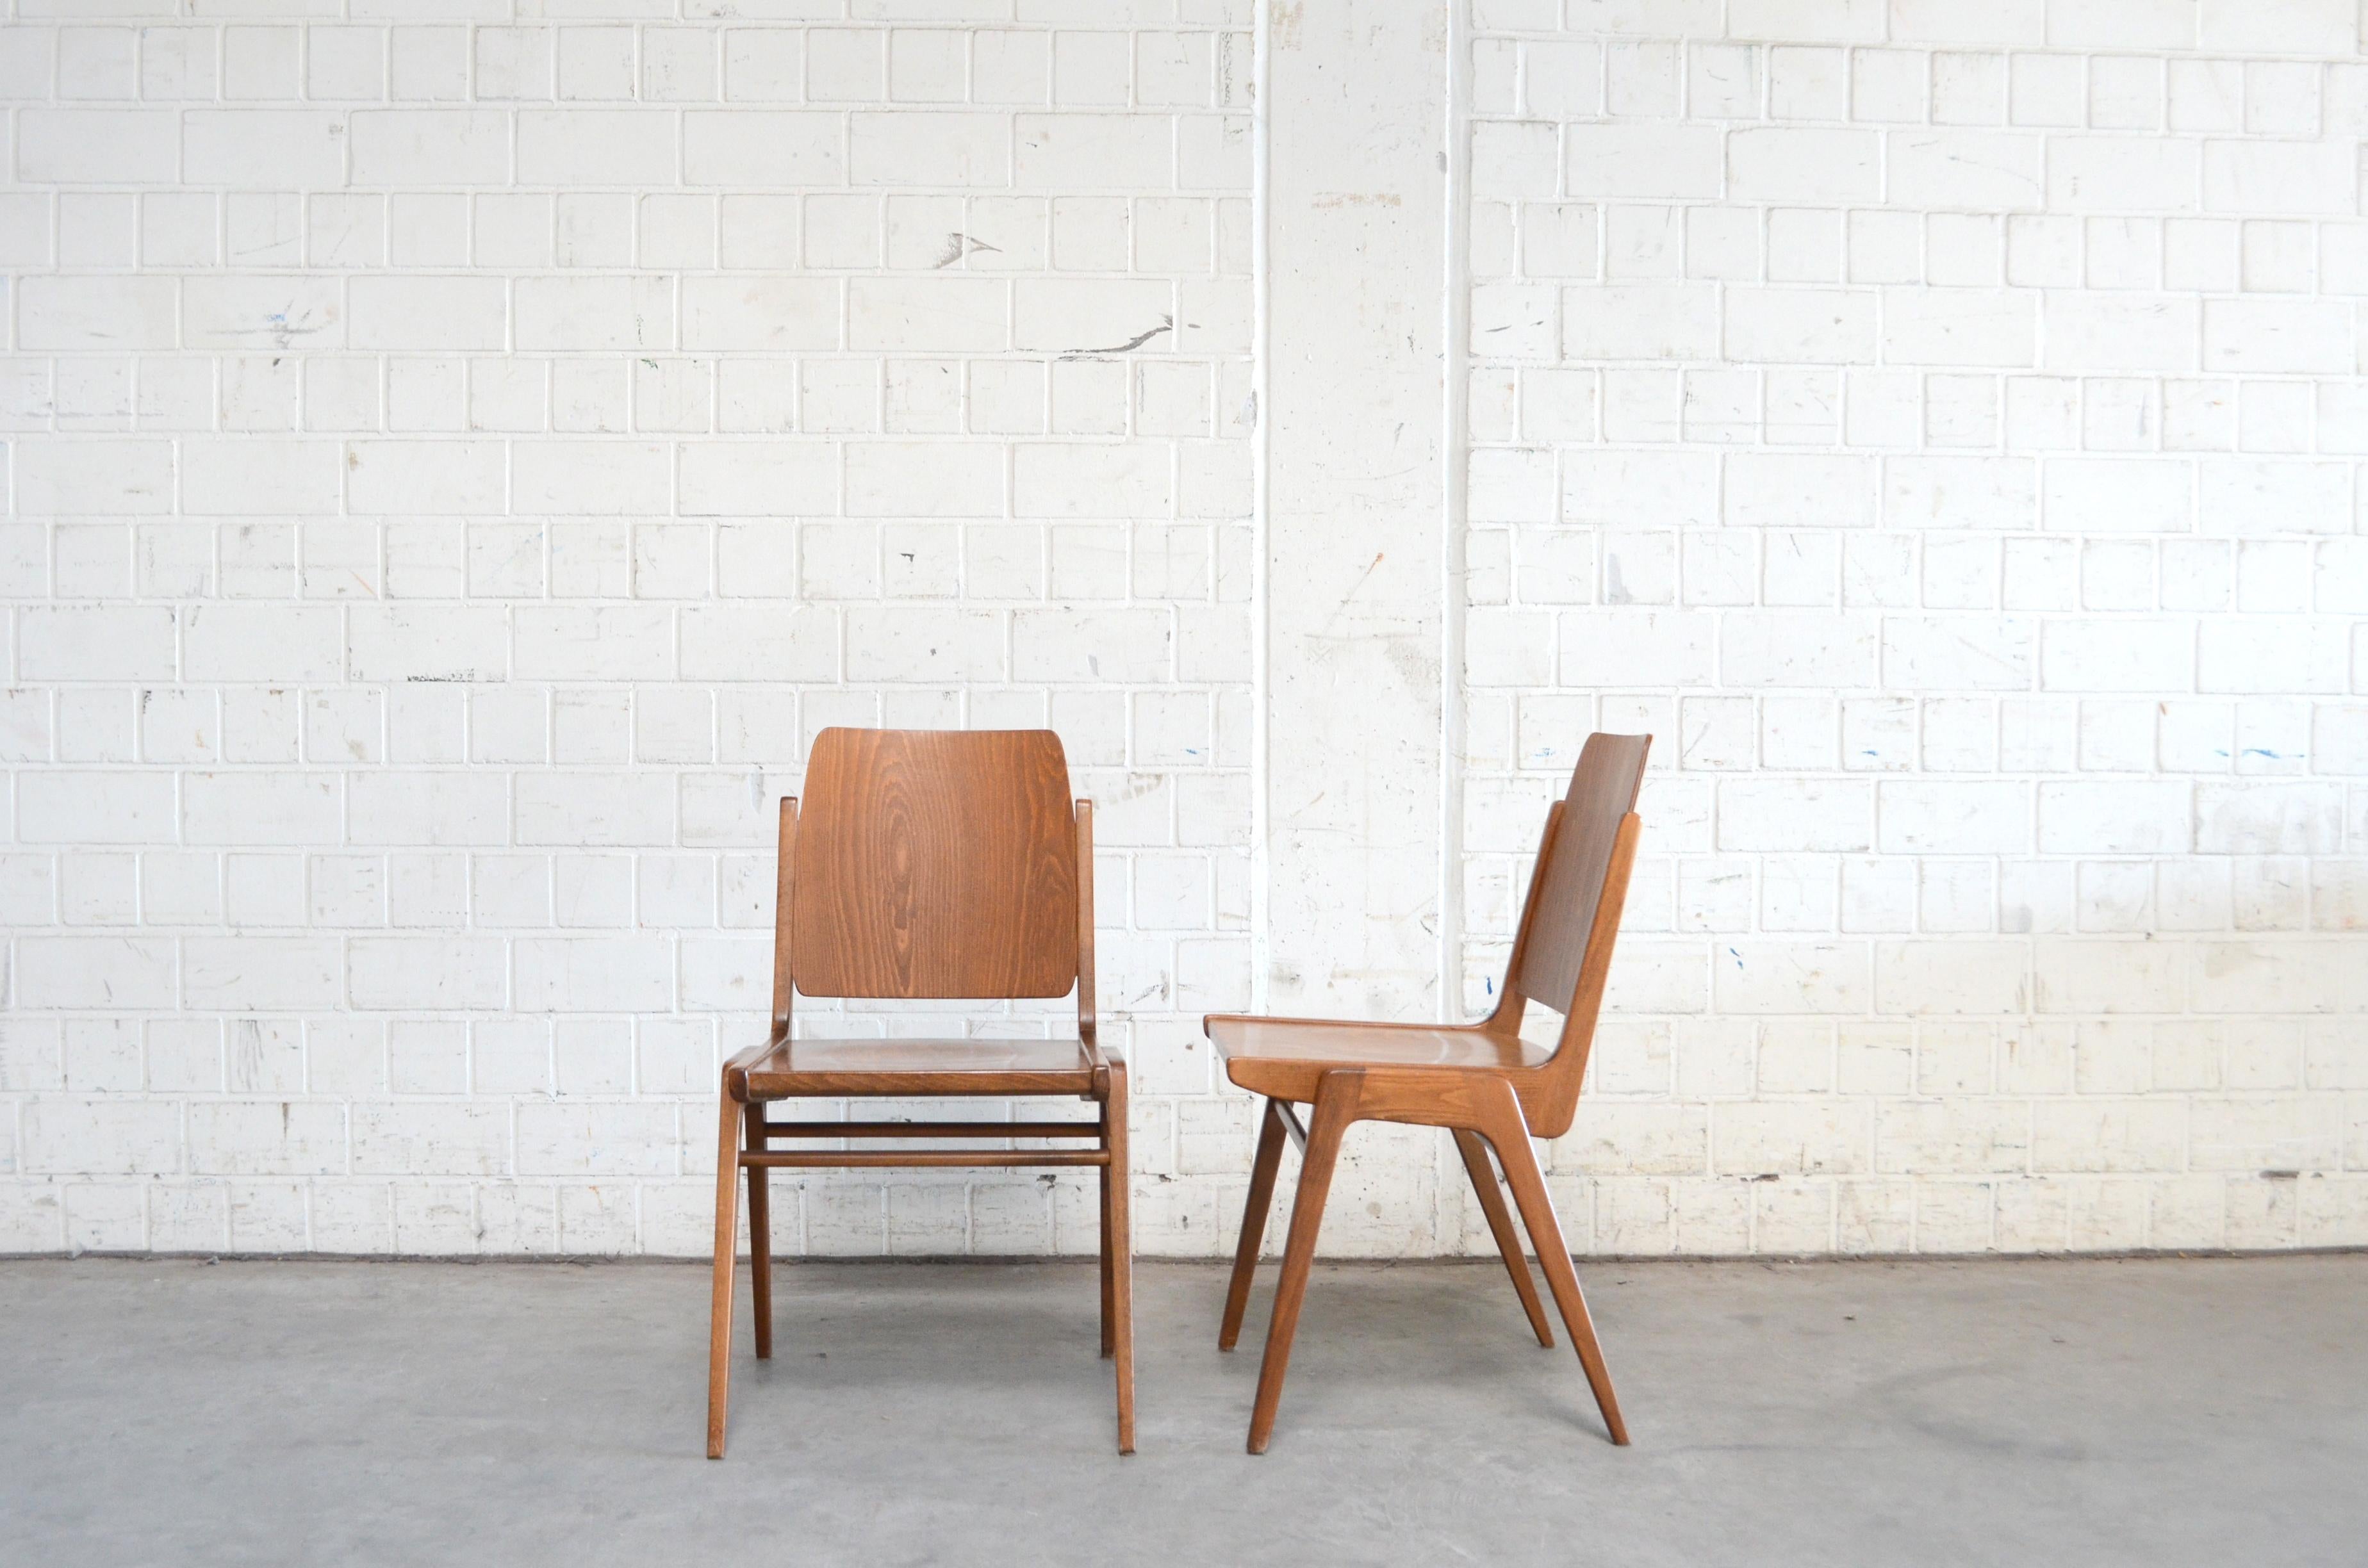 This Austro chairs are designed 1959 by Austrian architect Franz Schuster and produced by Wiesner Hager.
The chair gets well-known also as 